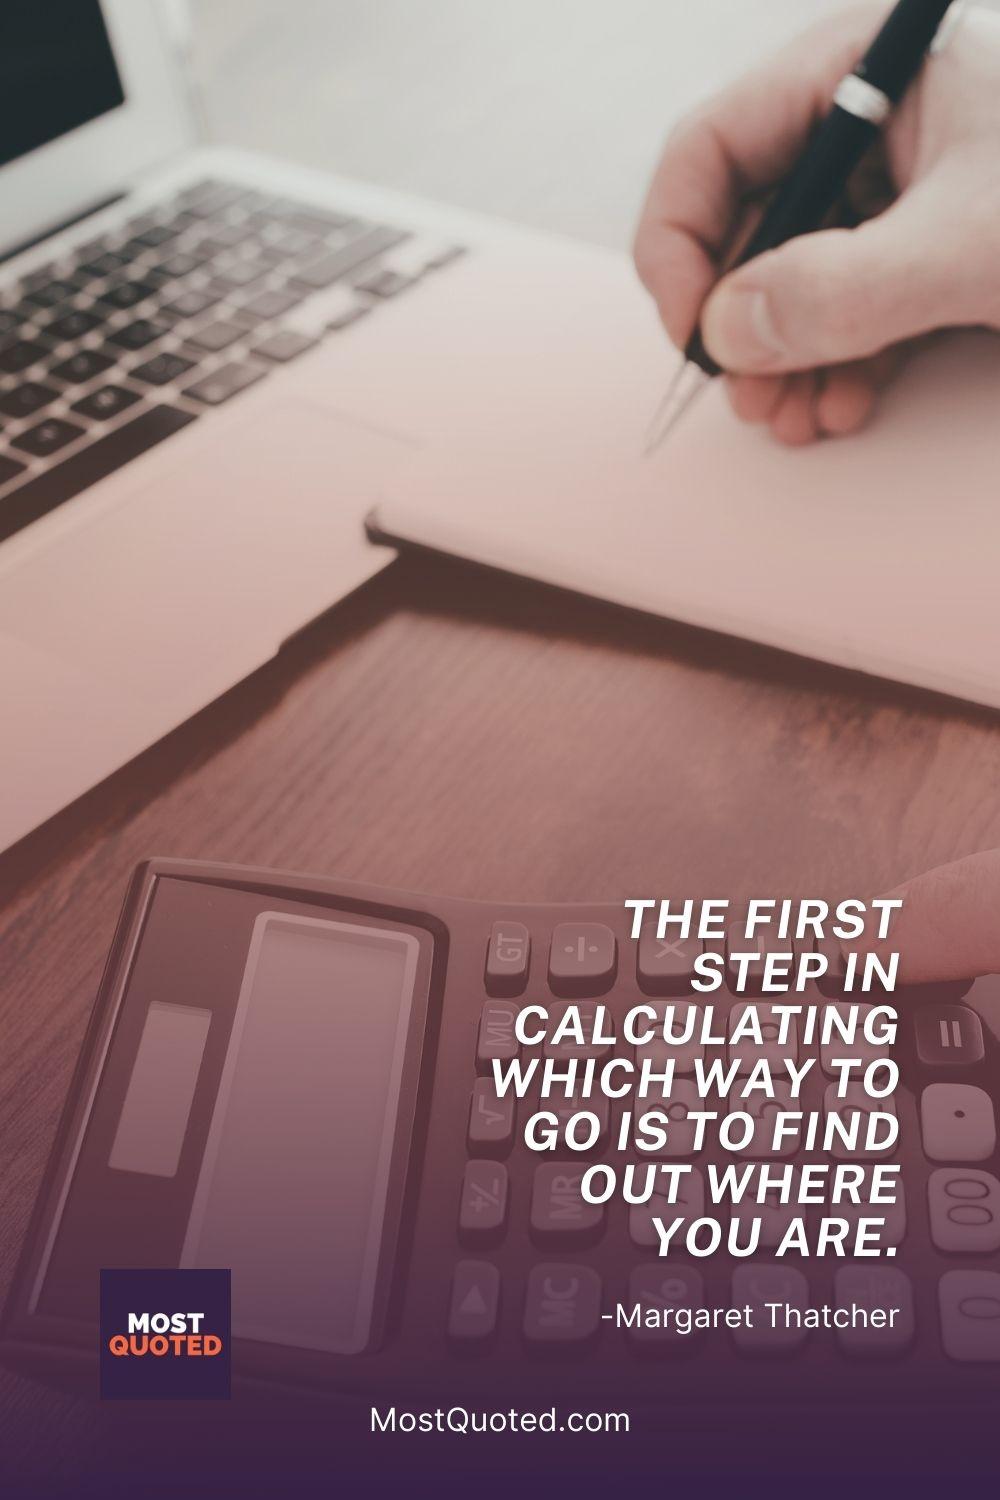 The first step in calculating which way to go is to find out where you are. - Margaret Thatcher